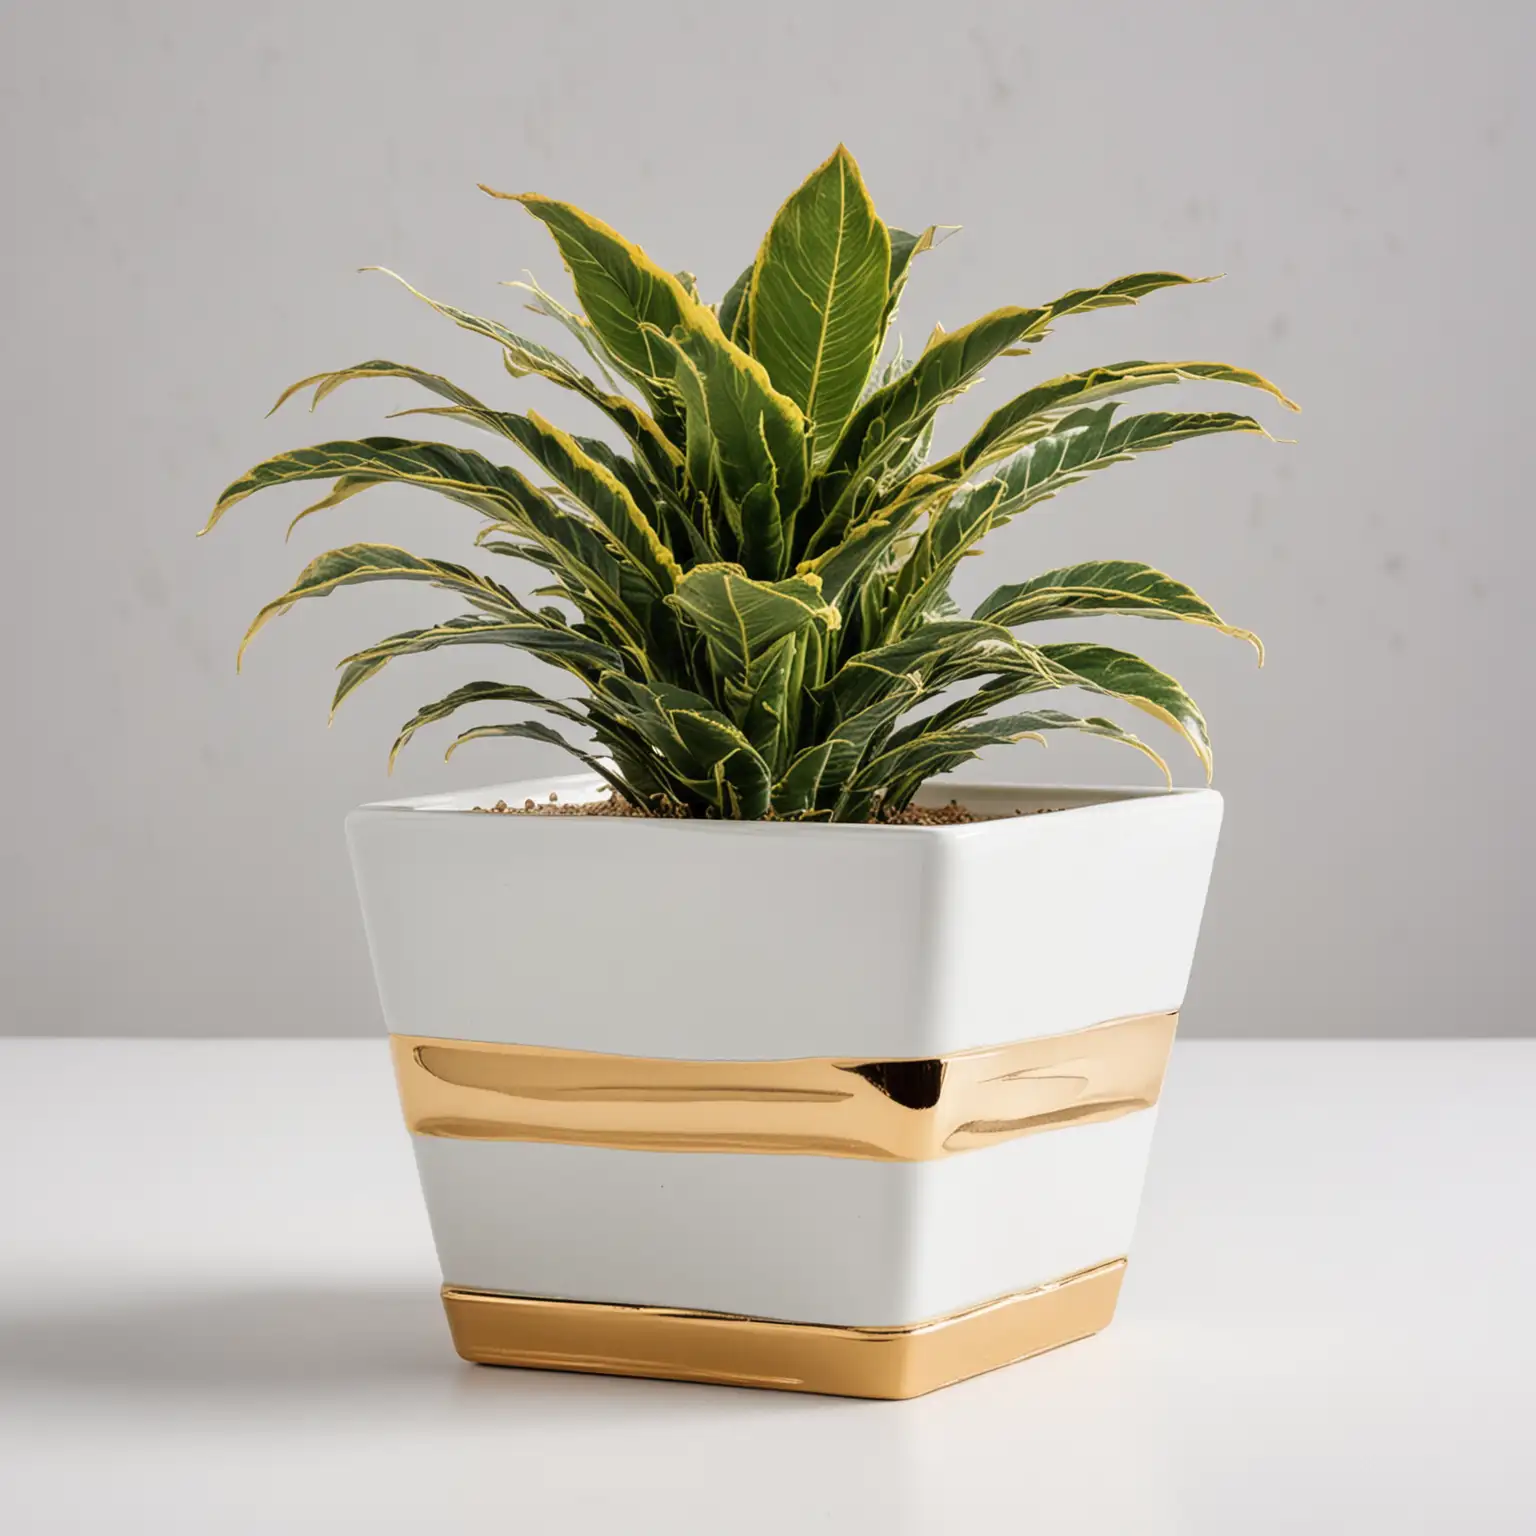 Luxurious GoldPlated Ceramic Flowerpot on White Background